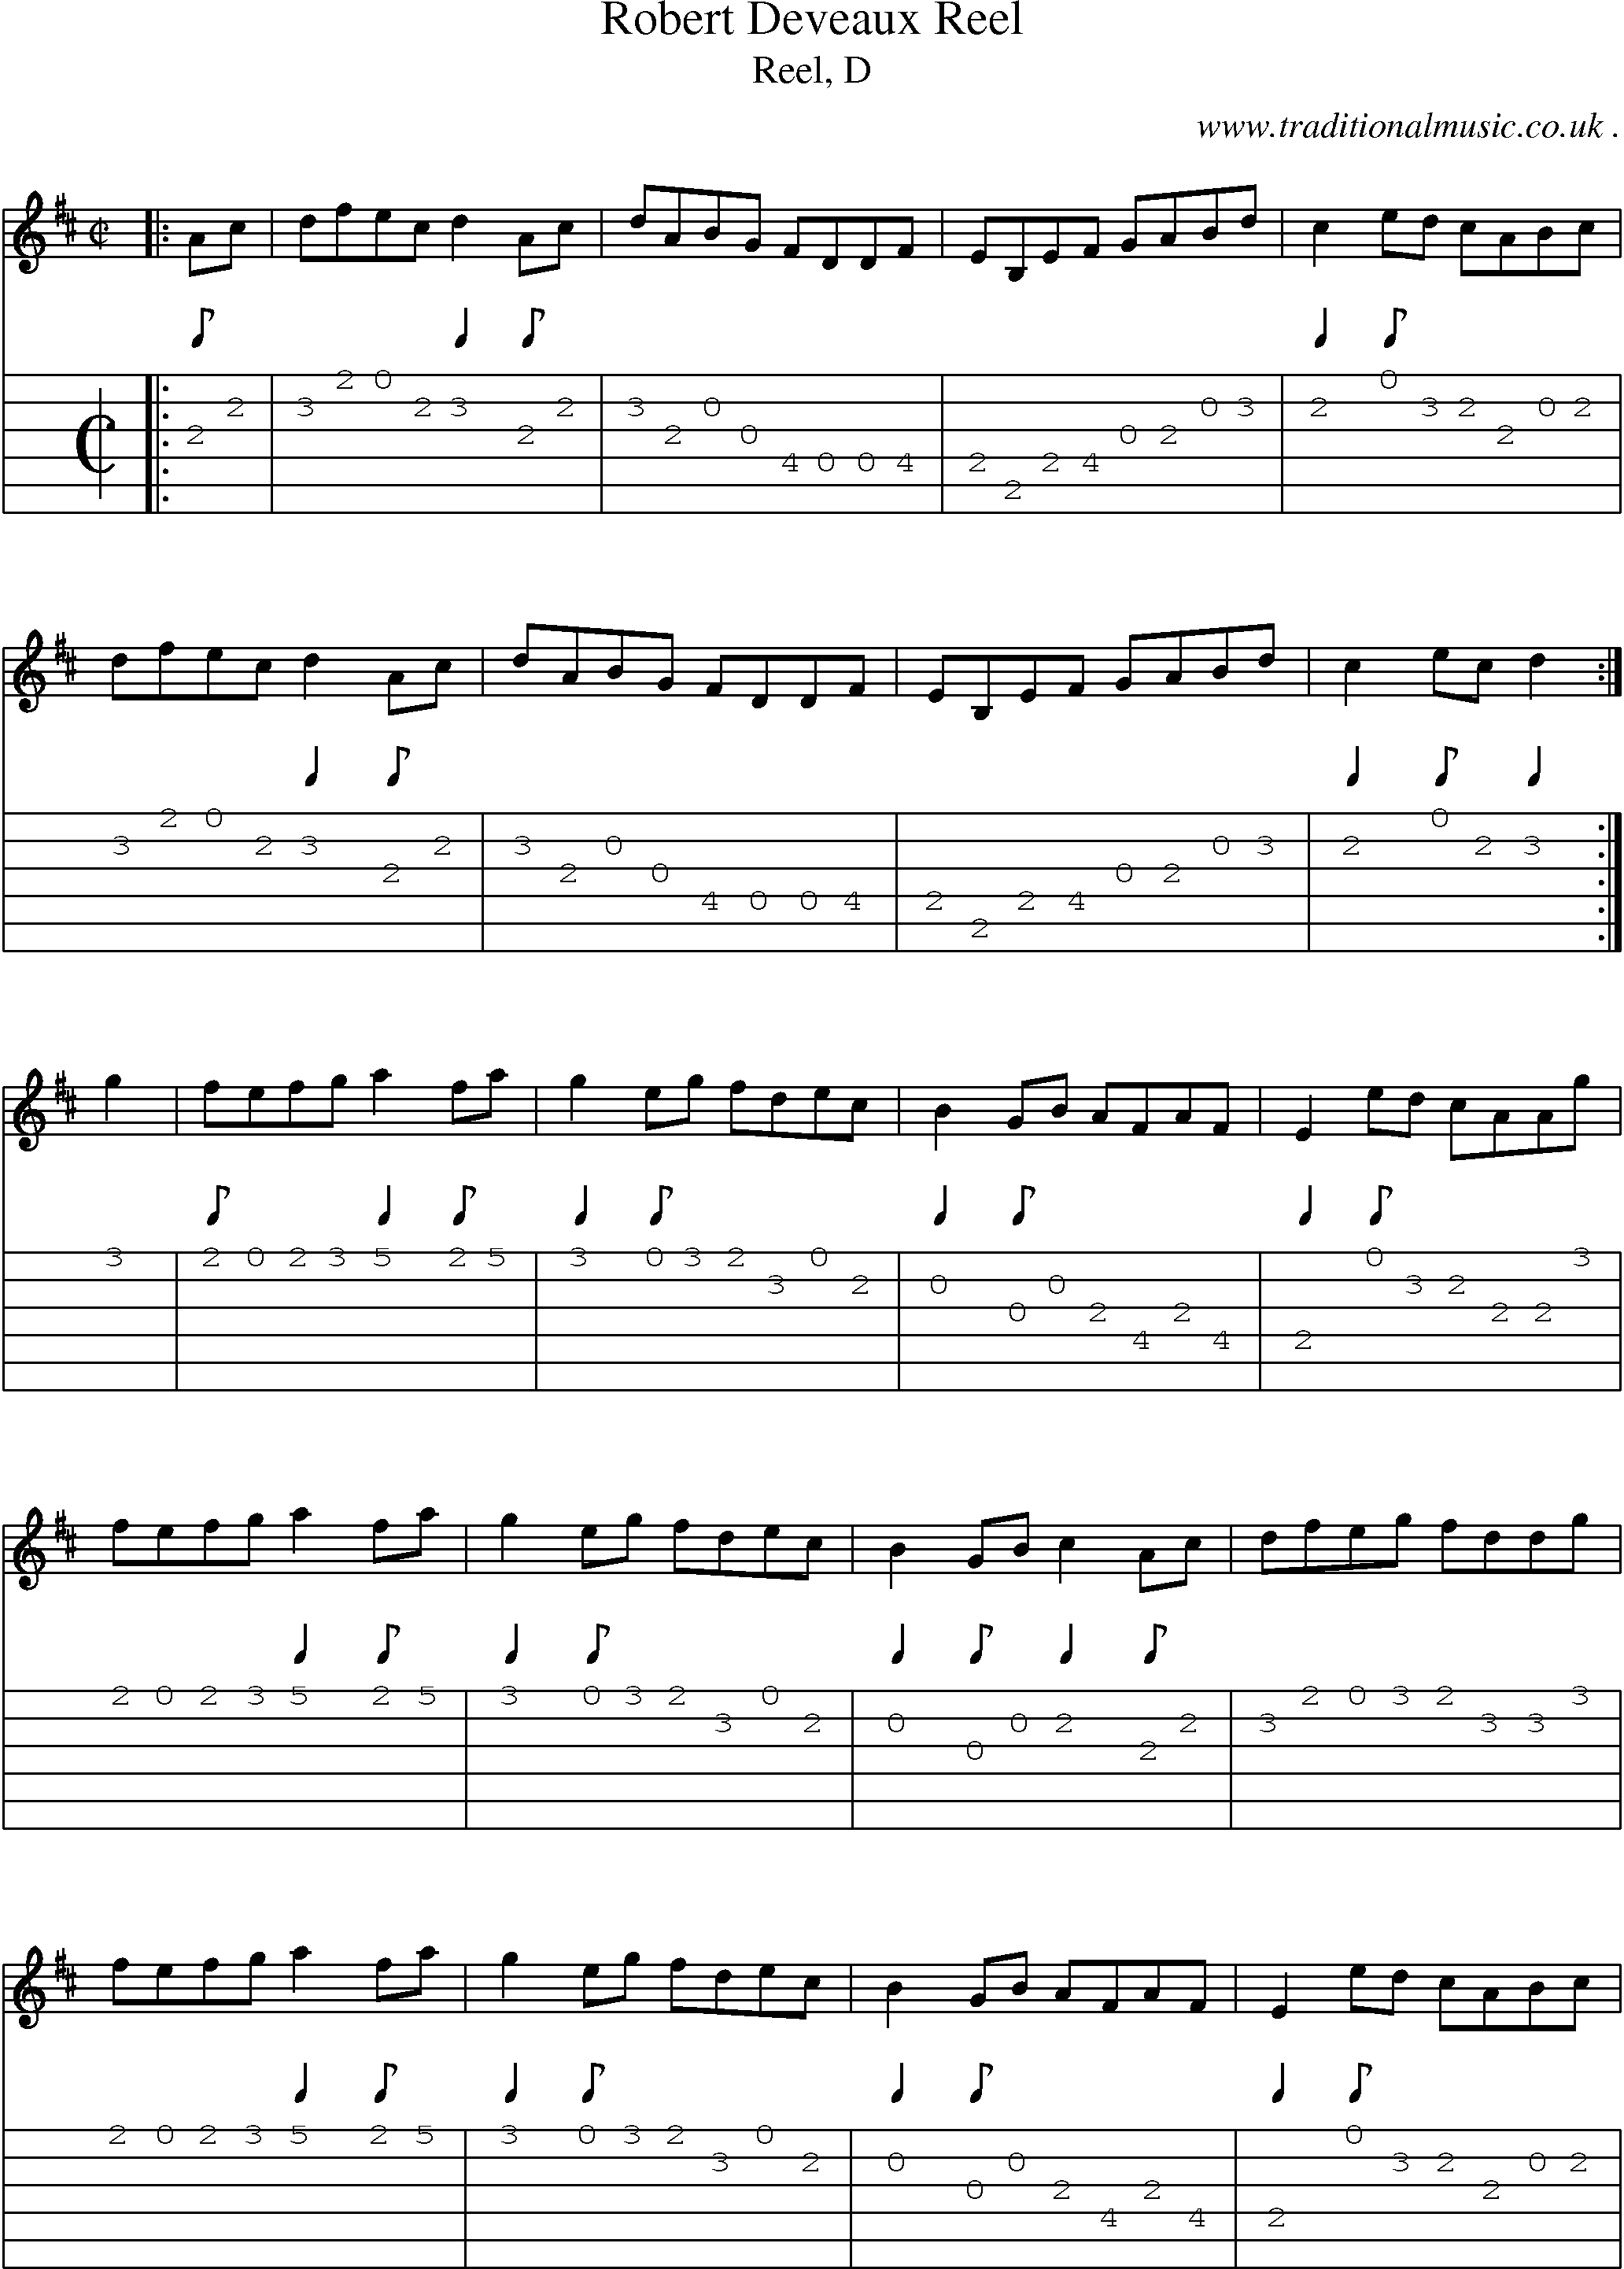 Sheet-music  score, Chords and Guitar Tabs for Robert Deveaux Reel